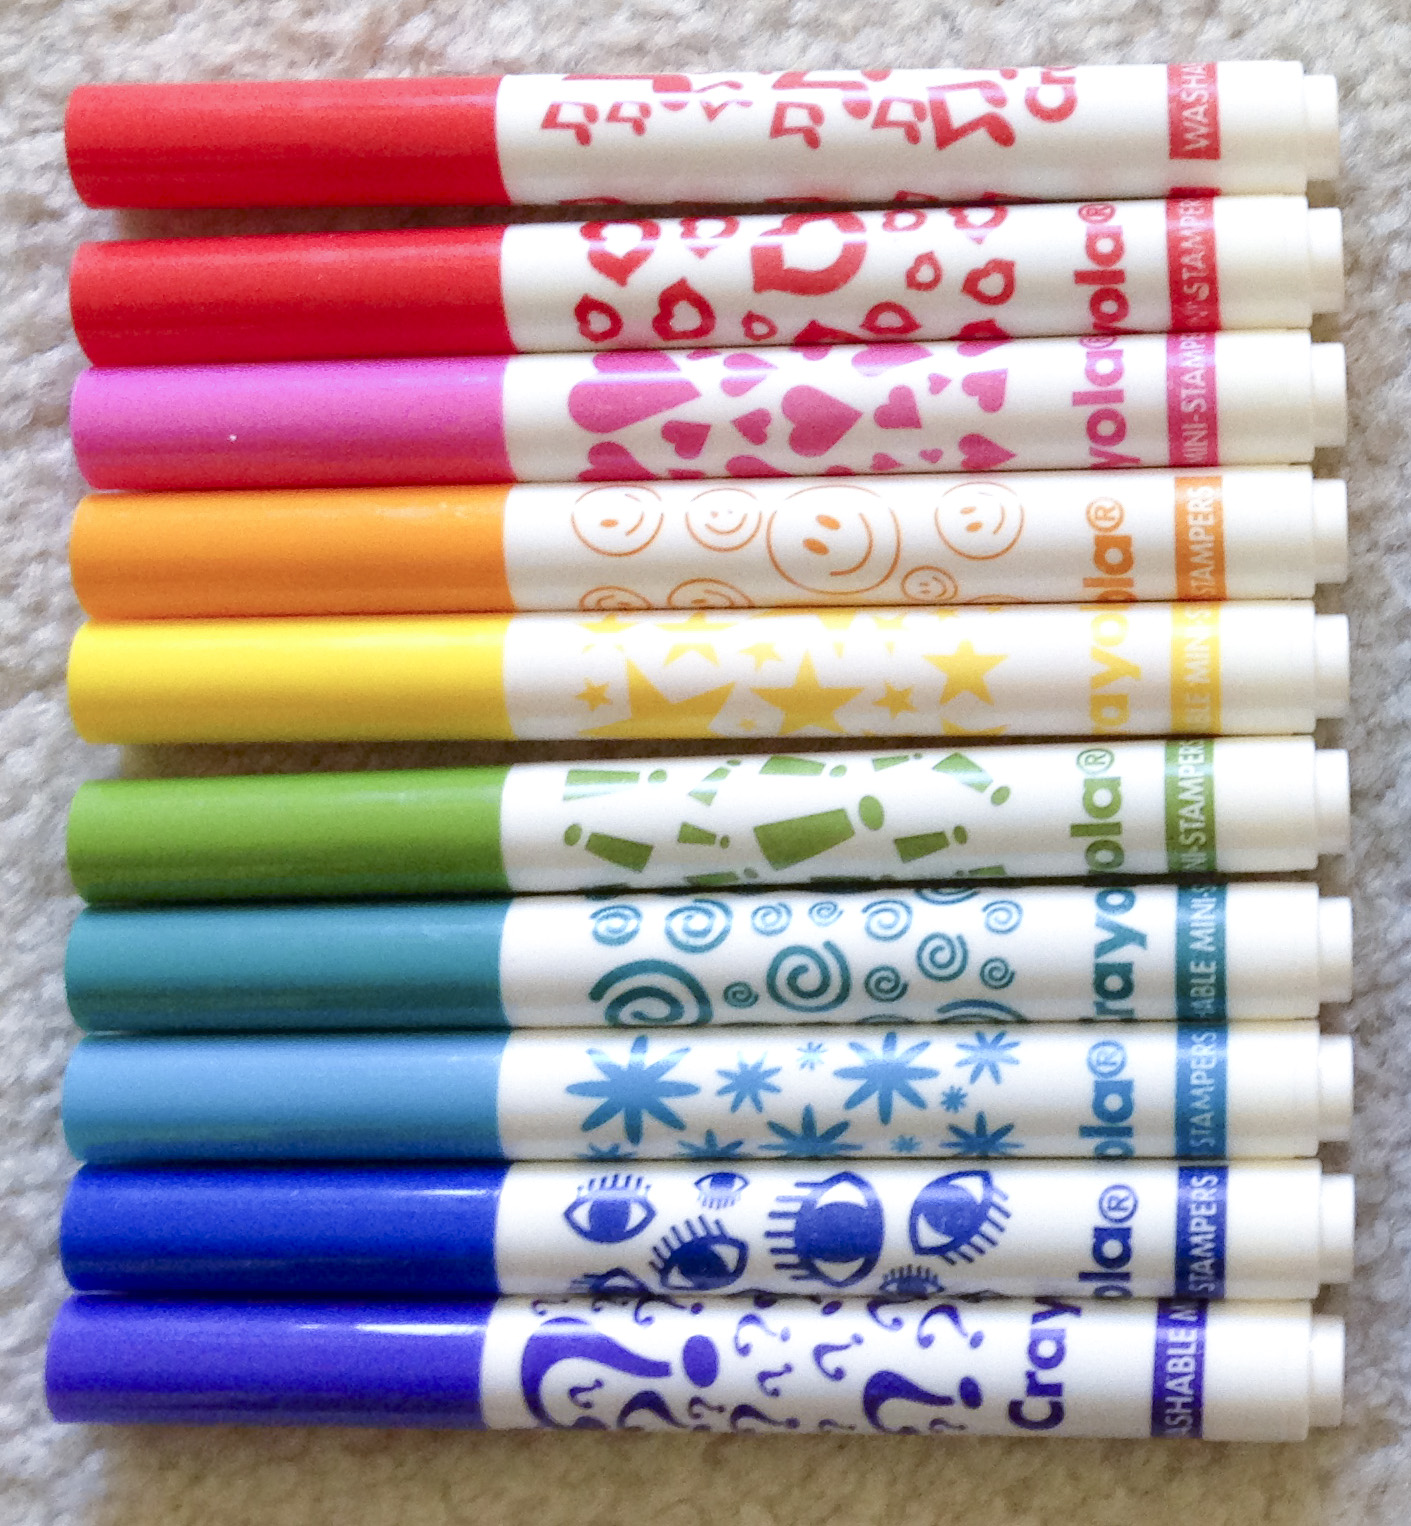  Crayola Stamper Markers with Emojis, Ultra Clean Washable  Markers, 10 Count : Office Products